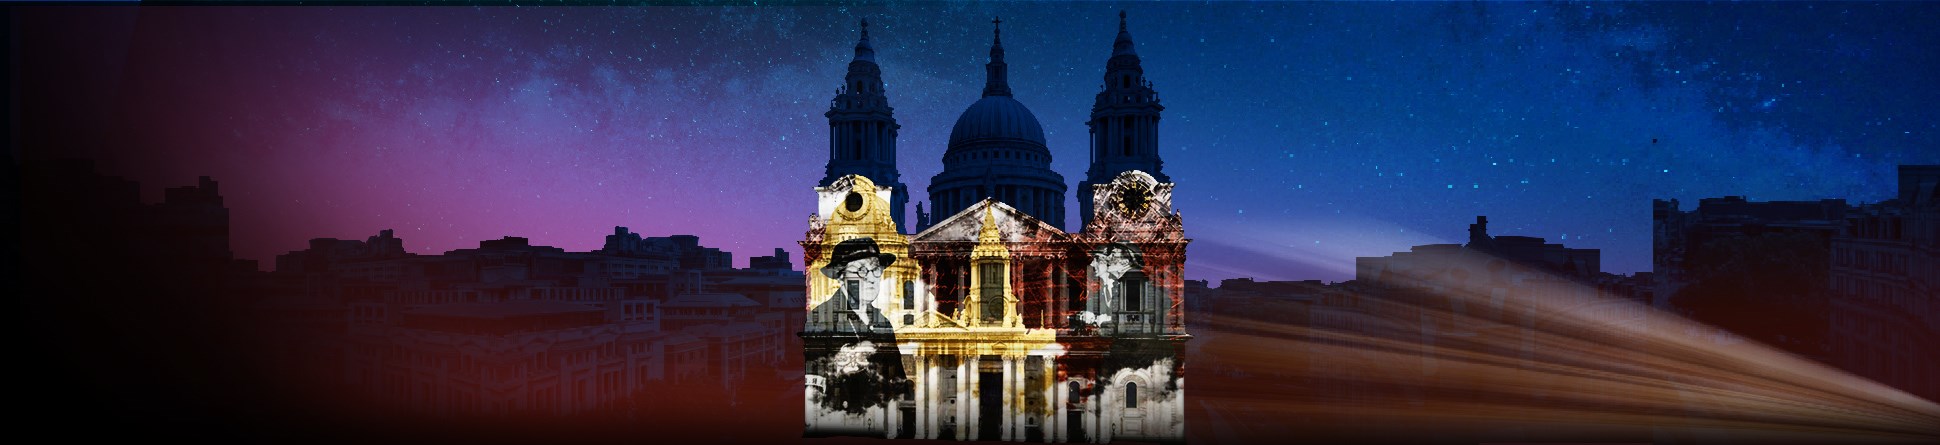 Artist's impression of light projections on St Paul's Cathedral